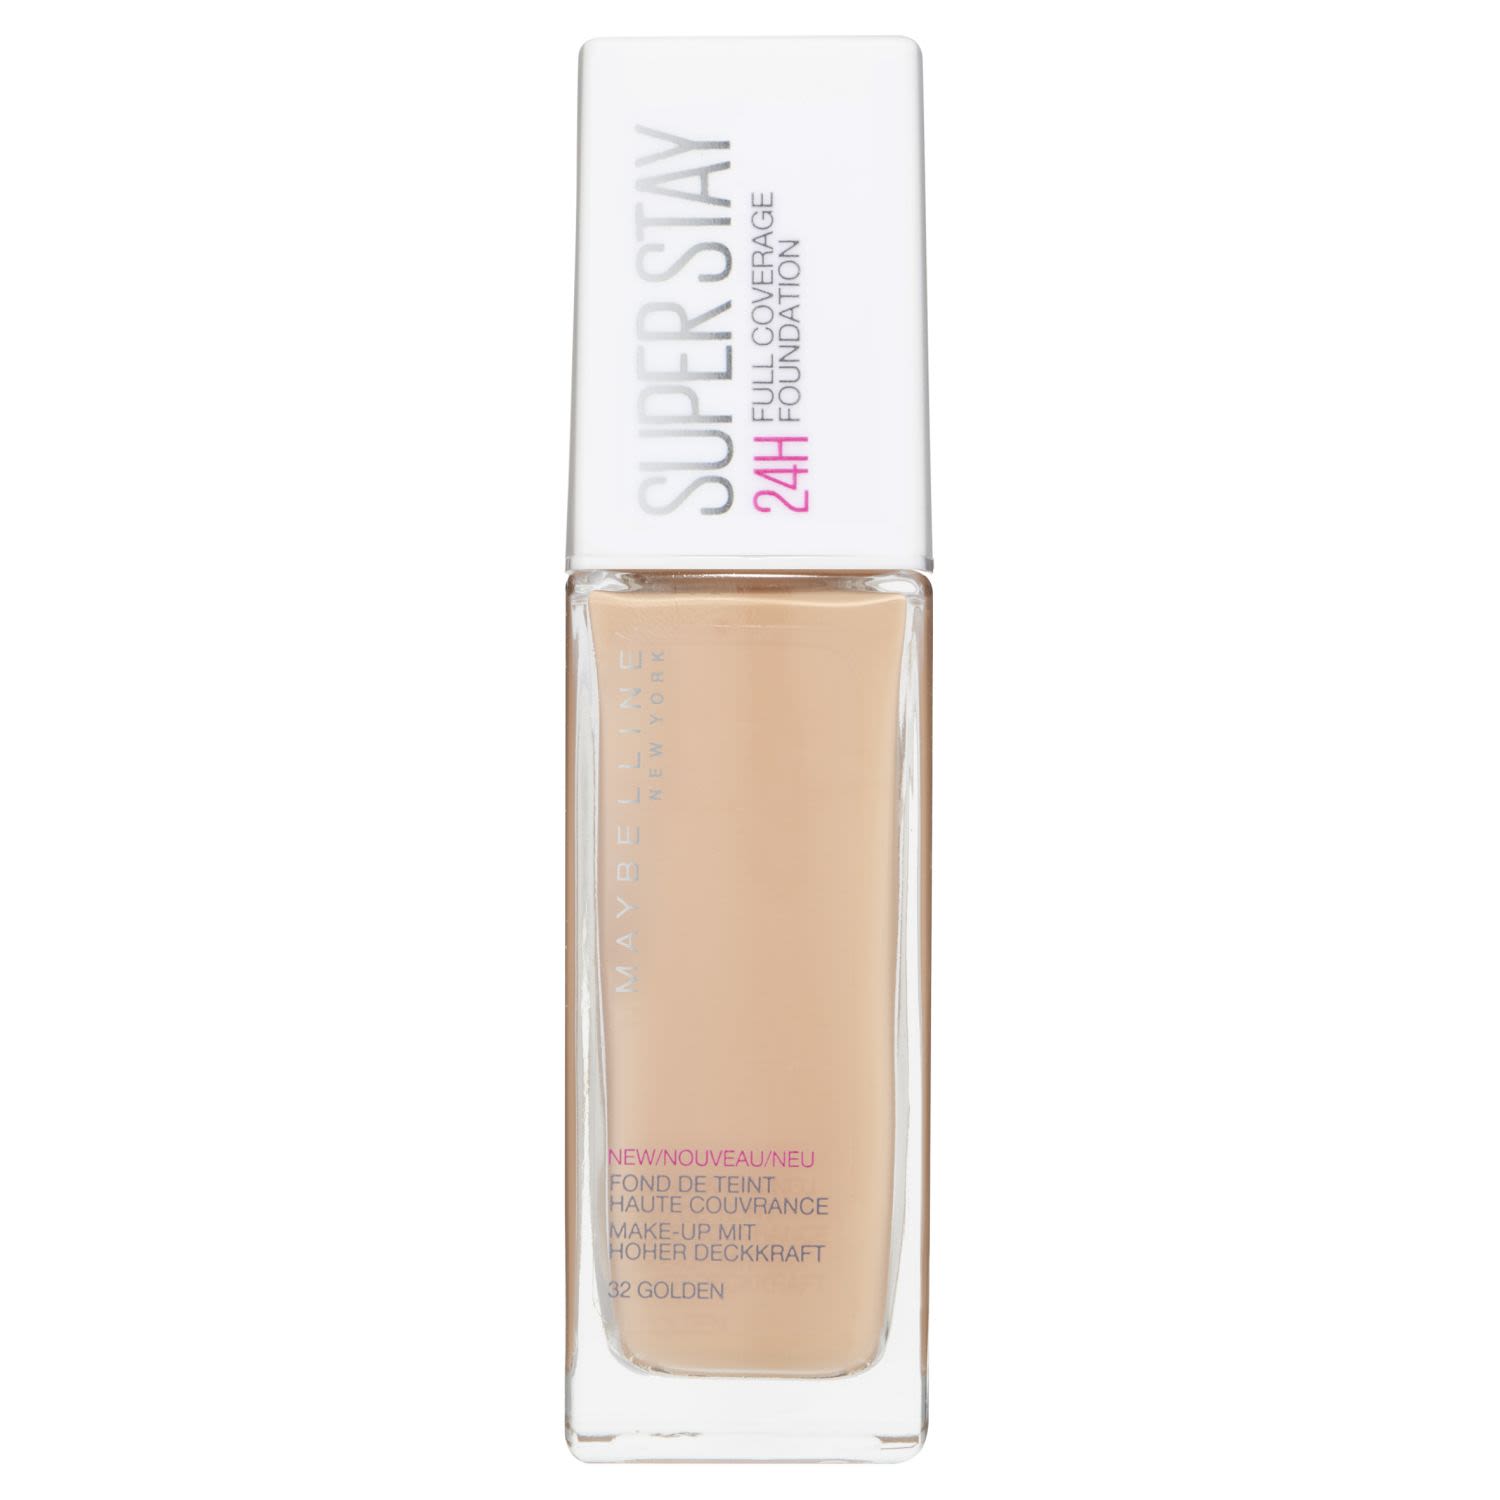 When it comes to high-pigment coverage with a lightweight, natural finish, this mighty matte foundation goes above and beyond to transform the look of your skin. This long-lasting foundation evens out and camouflages skin imperfections, provides a flawless finish, and combats the clock for 24-hour wear. Maybelline SuperStay 24HR Foundation features an oil-free formula that doesn't clog pores and is dermatologist tested.<br /> <br />